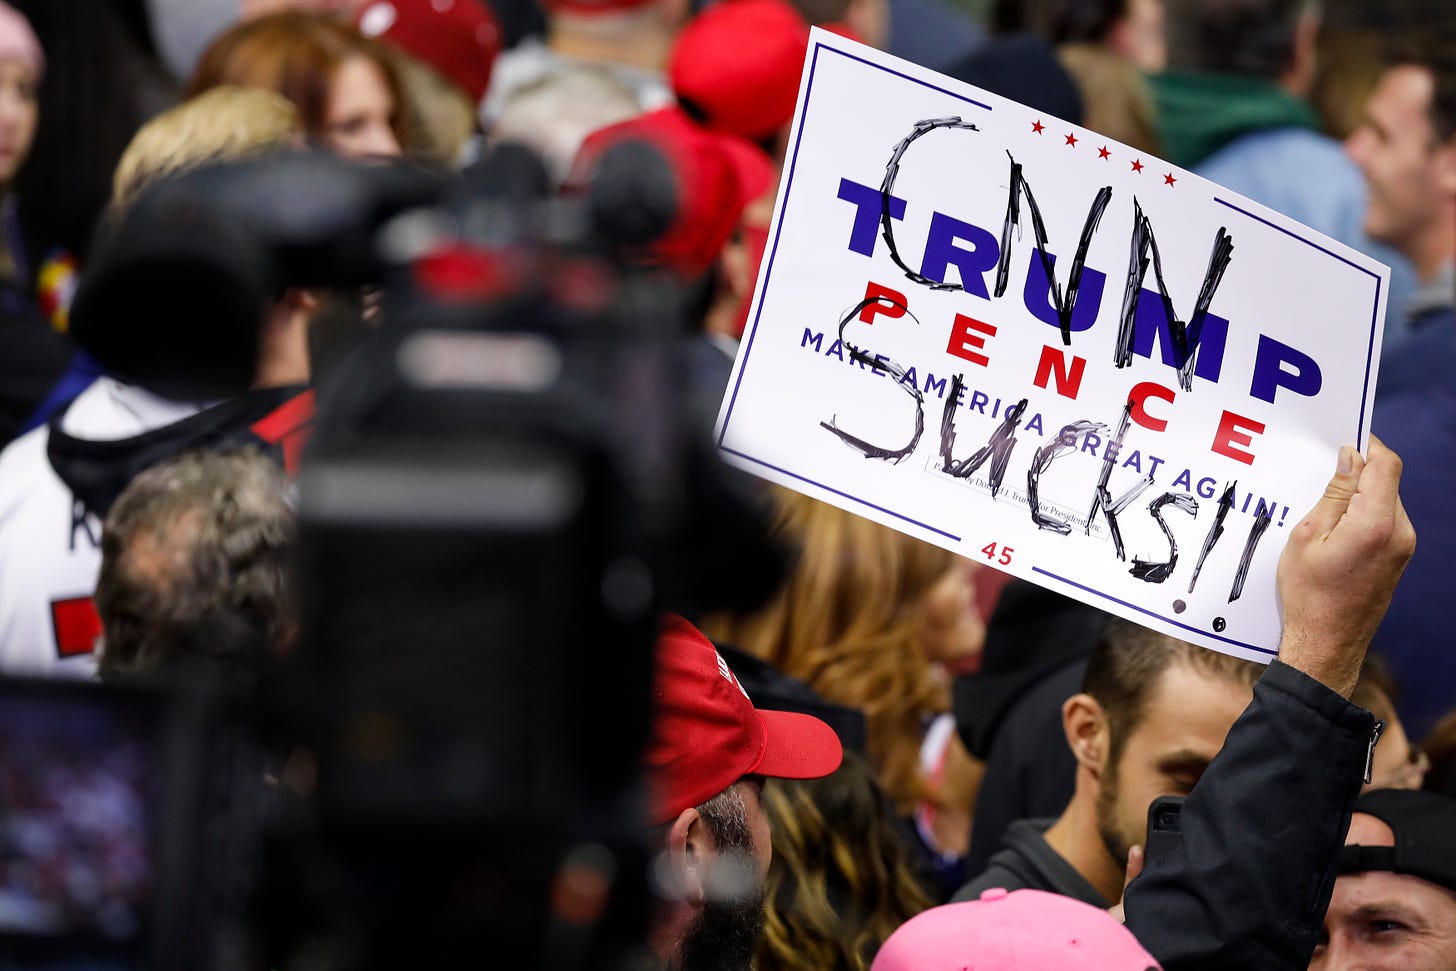 A Trump supporter holds a sign reading “CNN sucks” in 2018 in Fort Wayne, Indiana. (Photo by Aaron P. Bernstein/Getty Images)